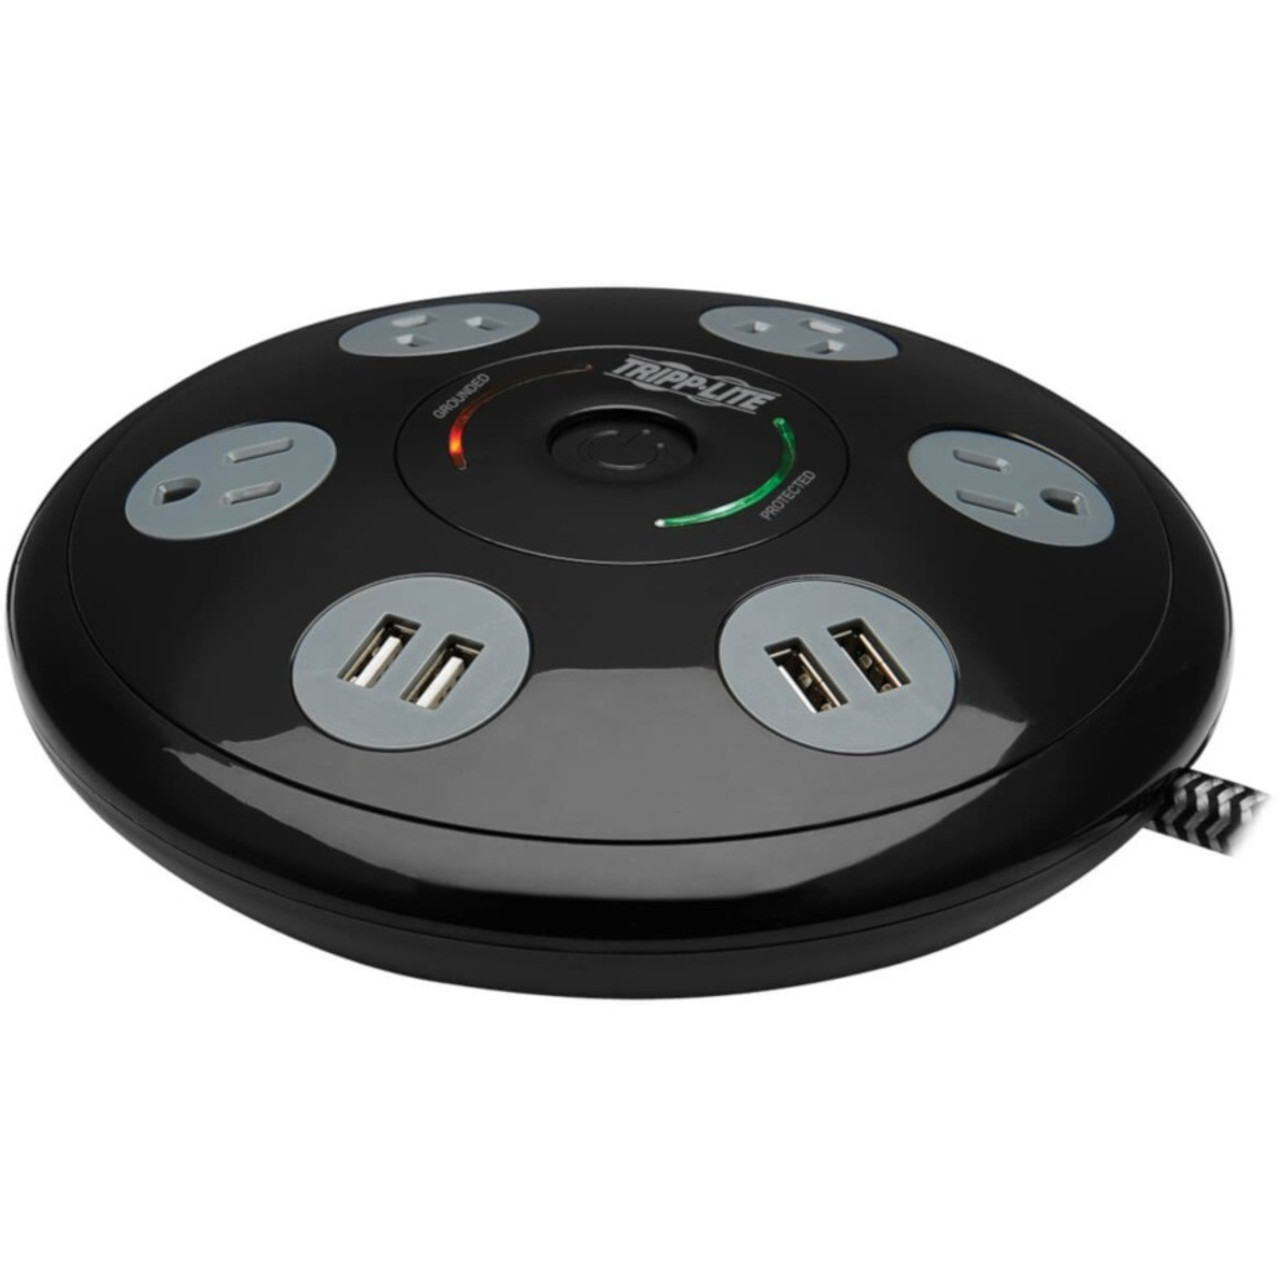 Tripp Lite Conference Surge Protector with 4 5-15R Outlets & 4 USB-A Ports 6ft Cord Black